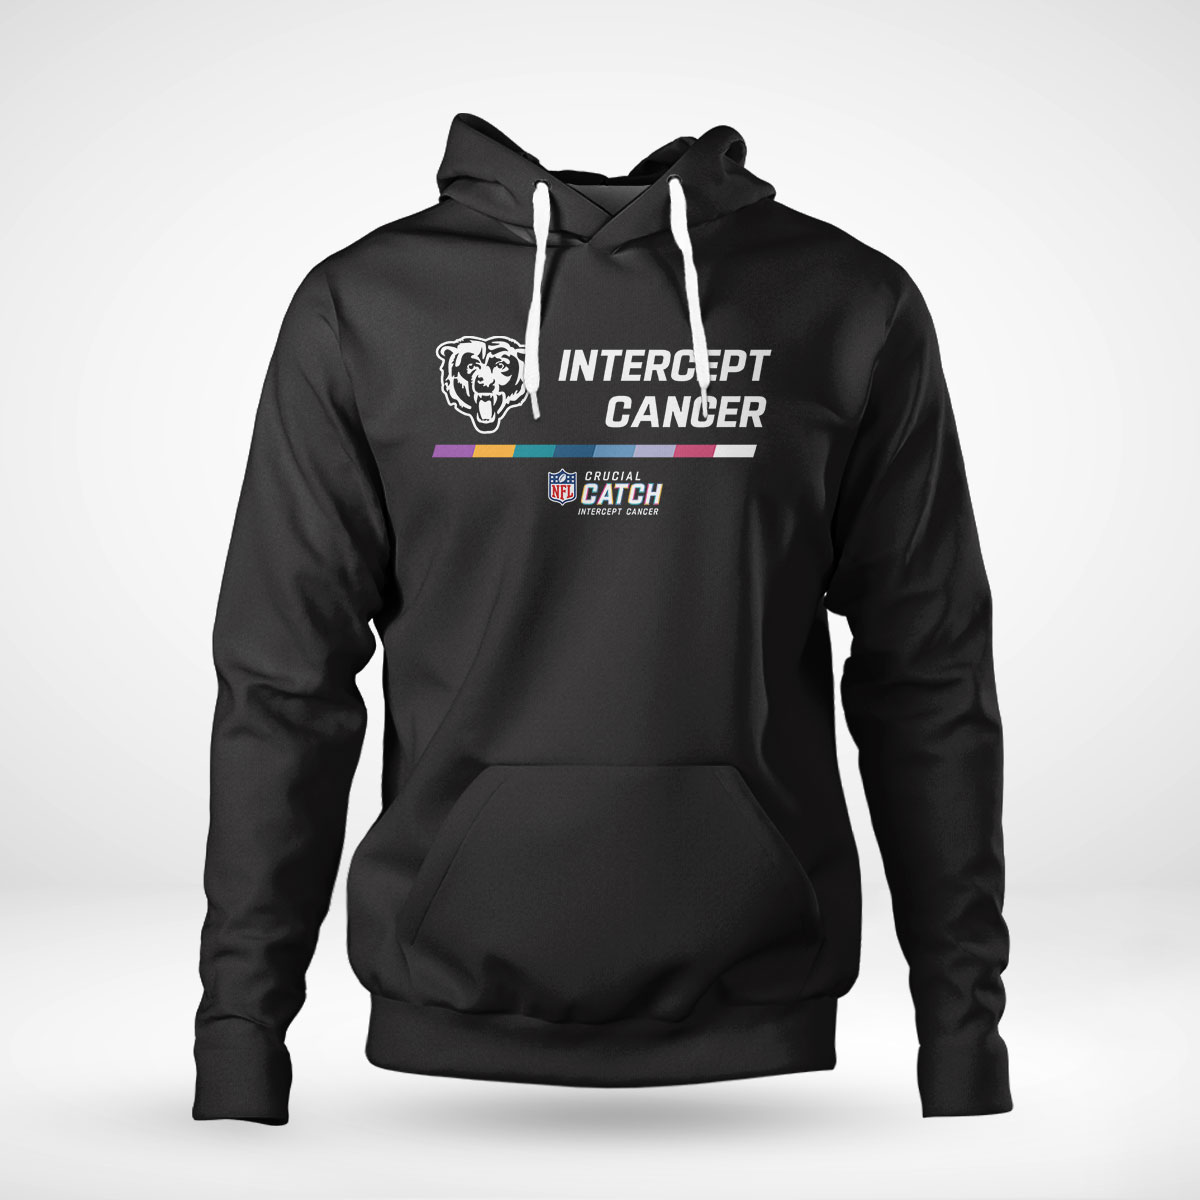 https://newagetee.com/product/chicago-bears-2022-nfl-intercept-cancer-crucial-catch-therma-performance-pullover-hoodie-t-shirt-long-sleeve-ladies-tee/